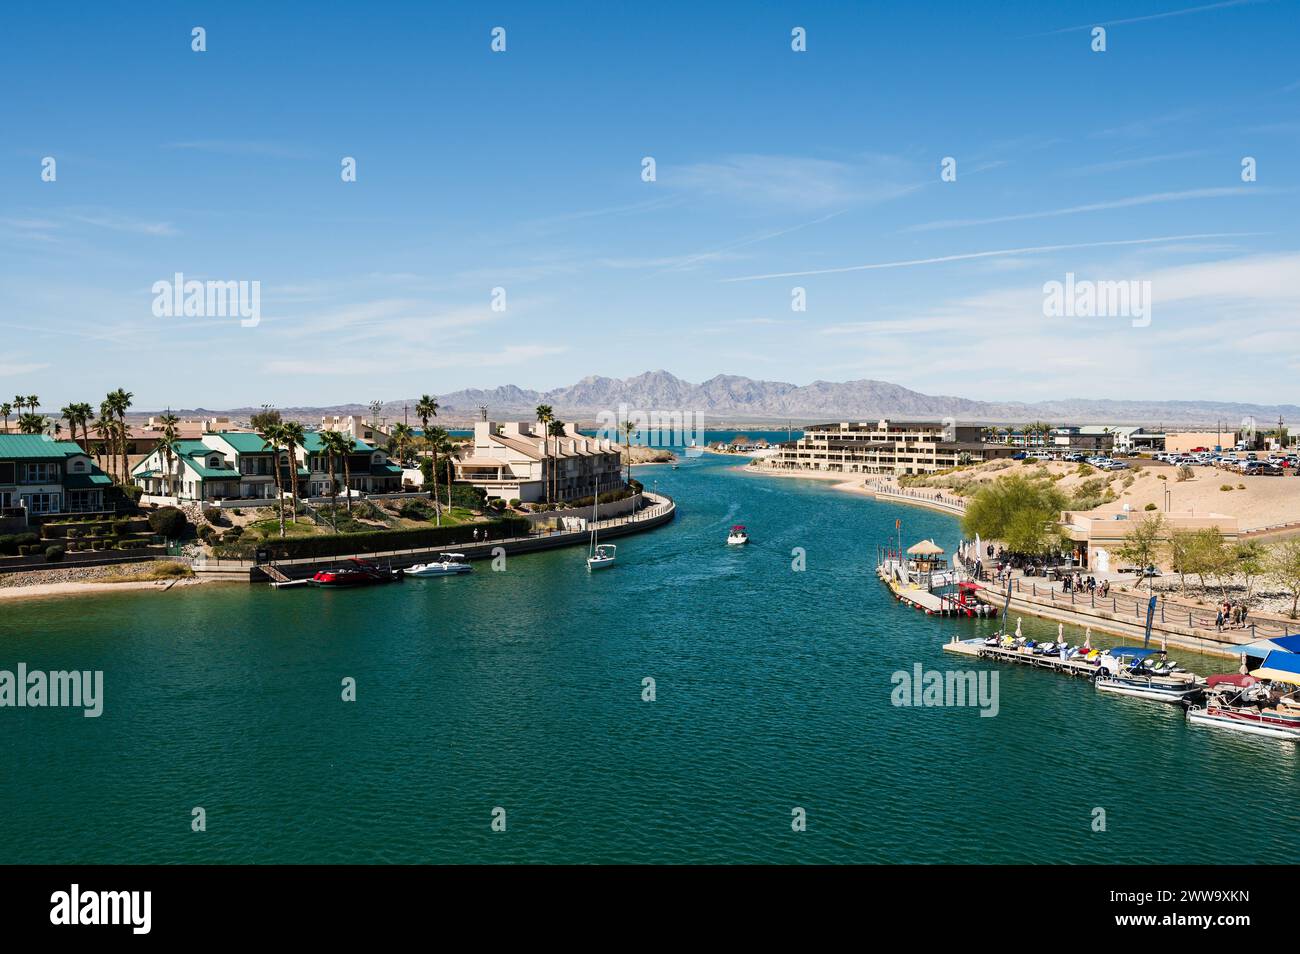 Tour boats near the old London Bridge, which was relocated from London England in the 1970’s to Lake Havasu Arizona. Stock Photo